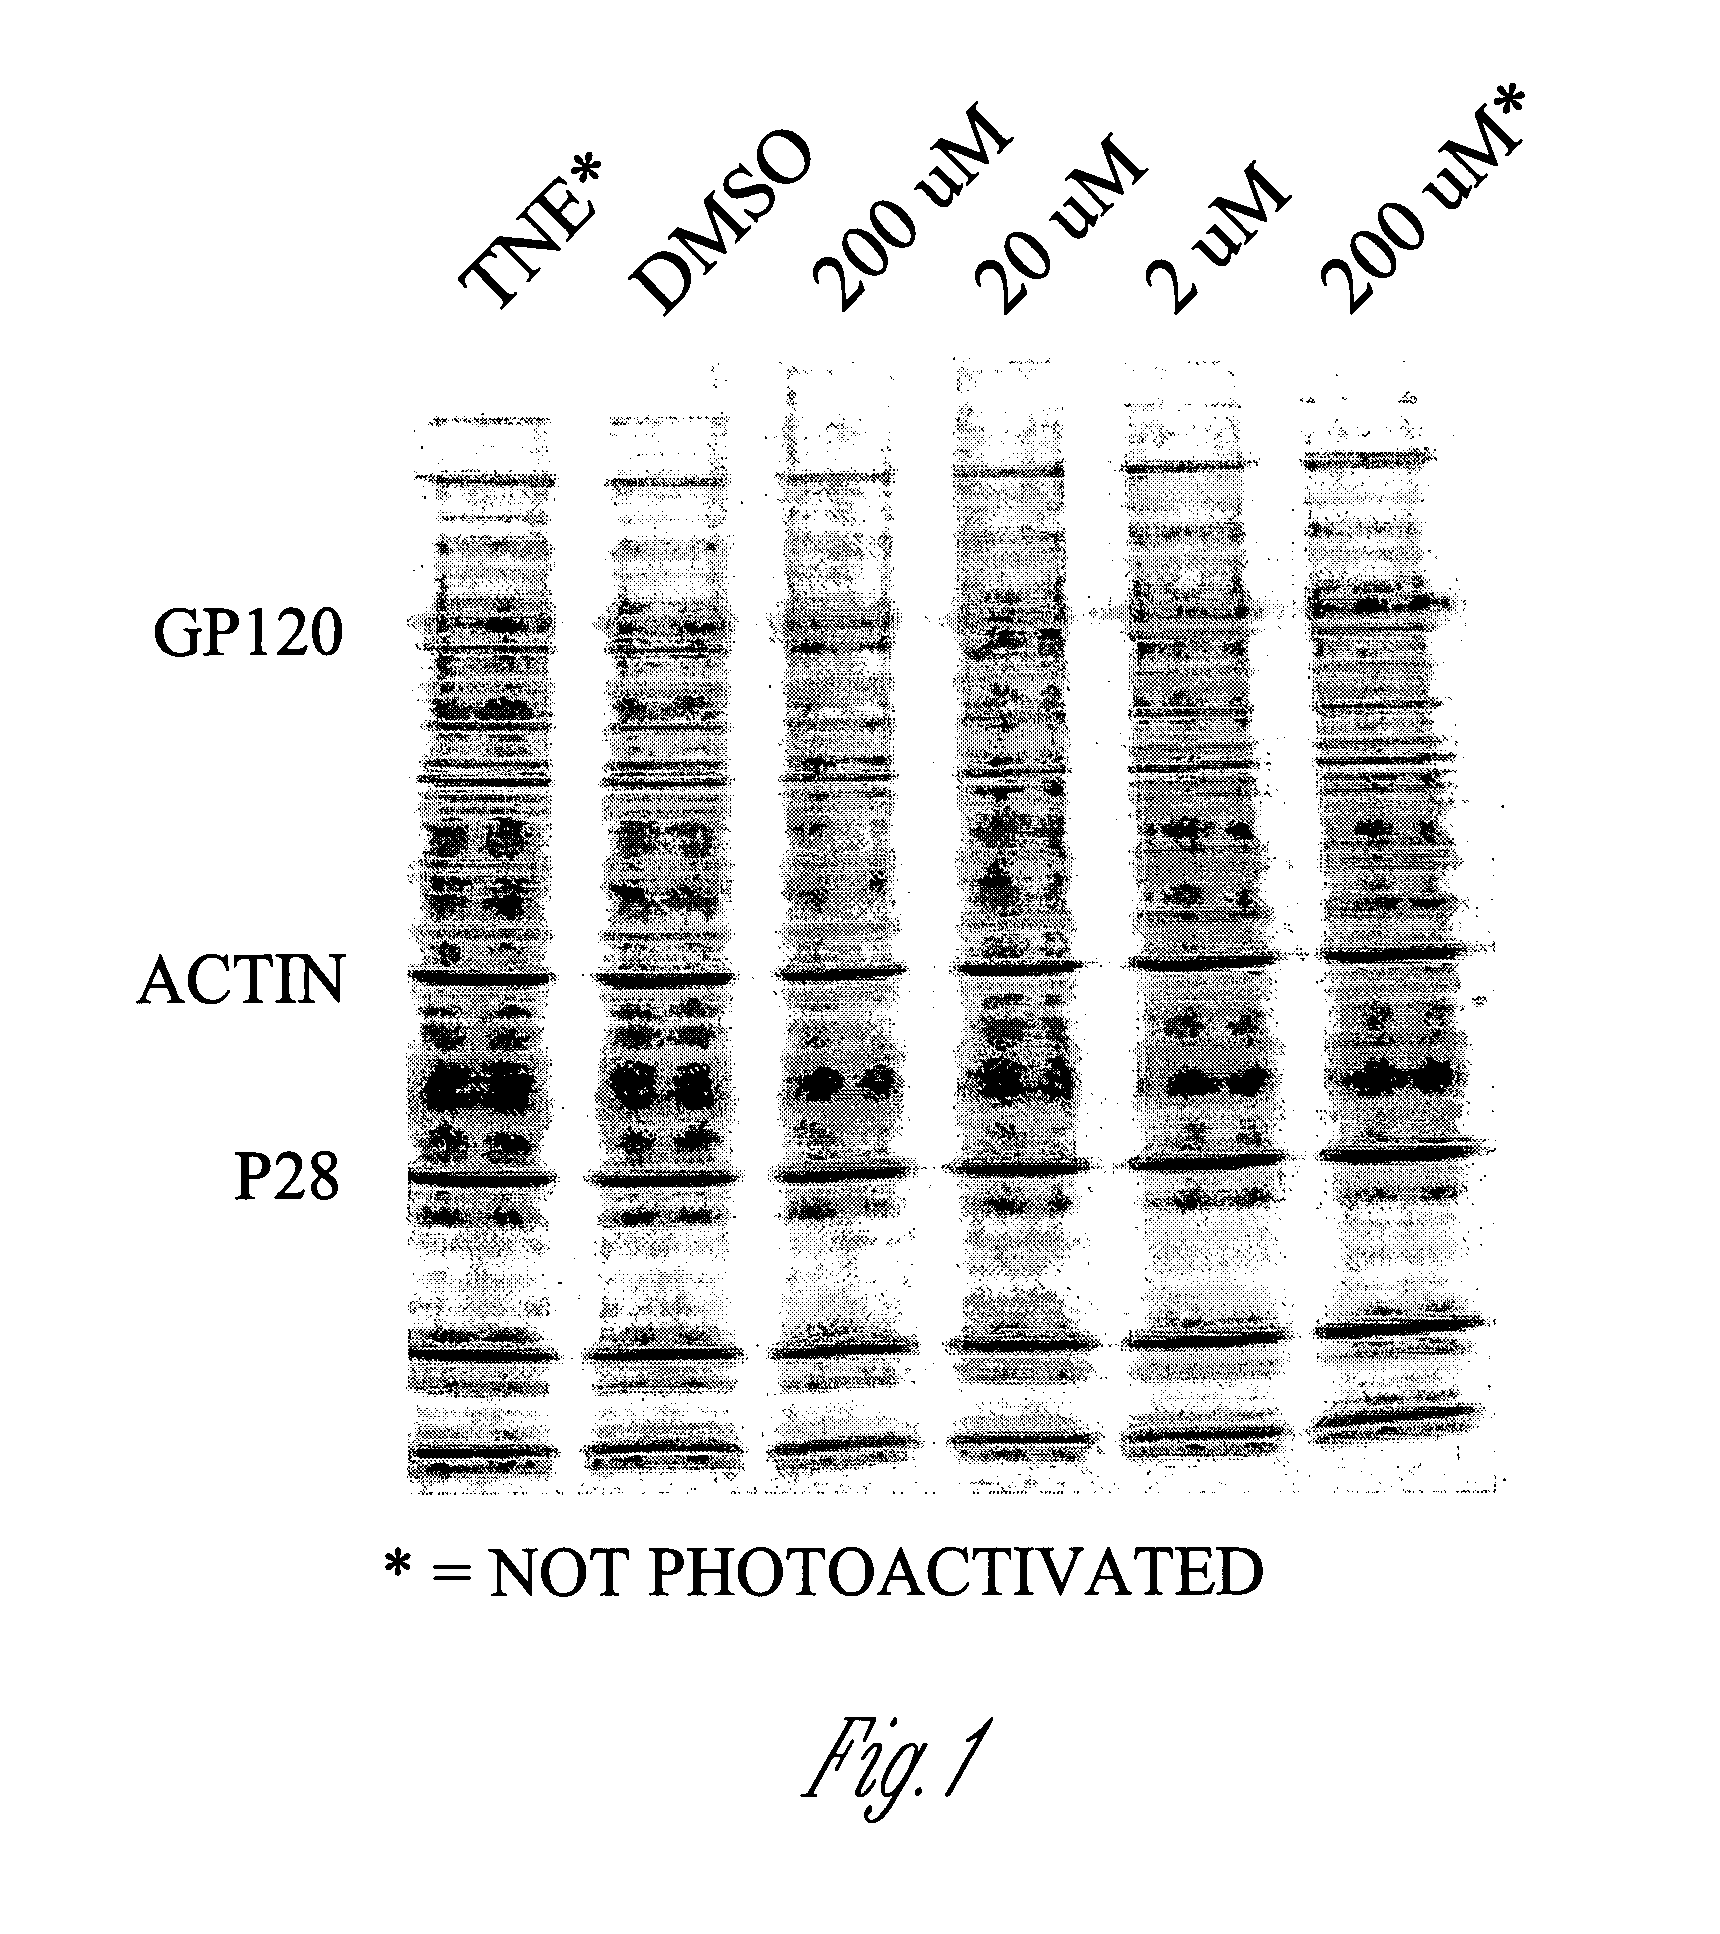 Inactivated Influenza Virus Compositions